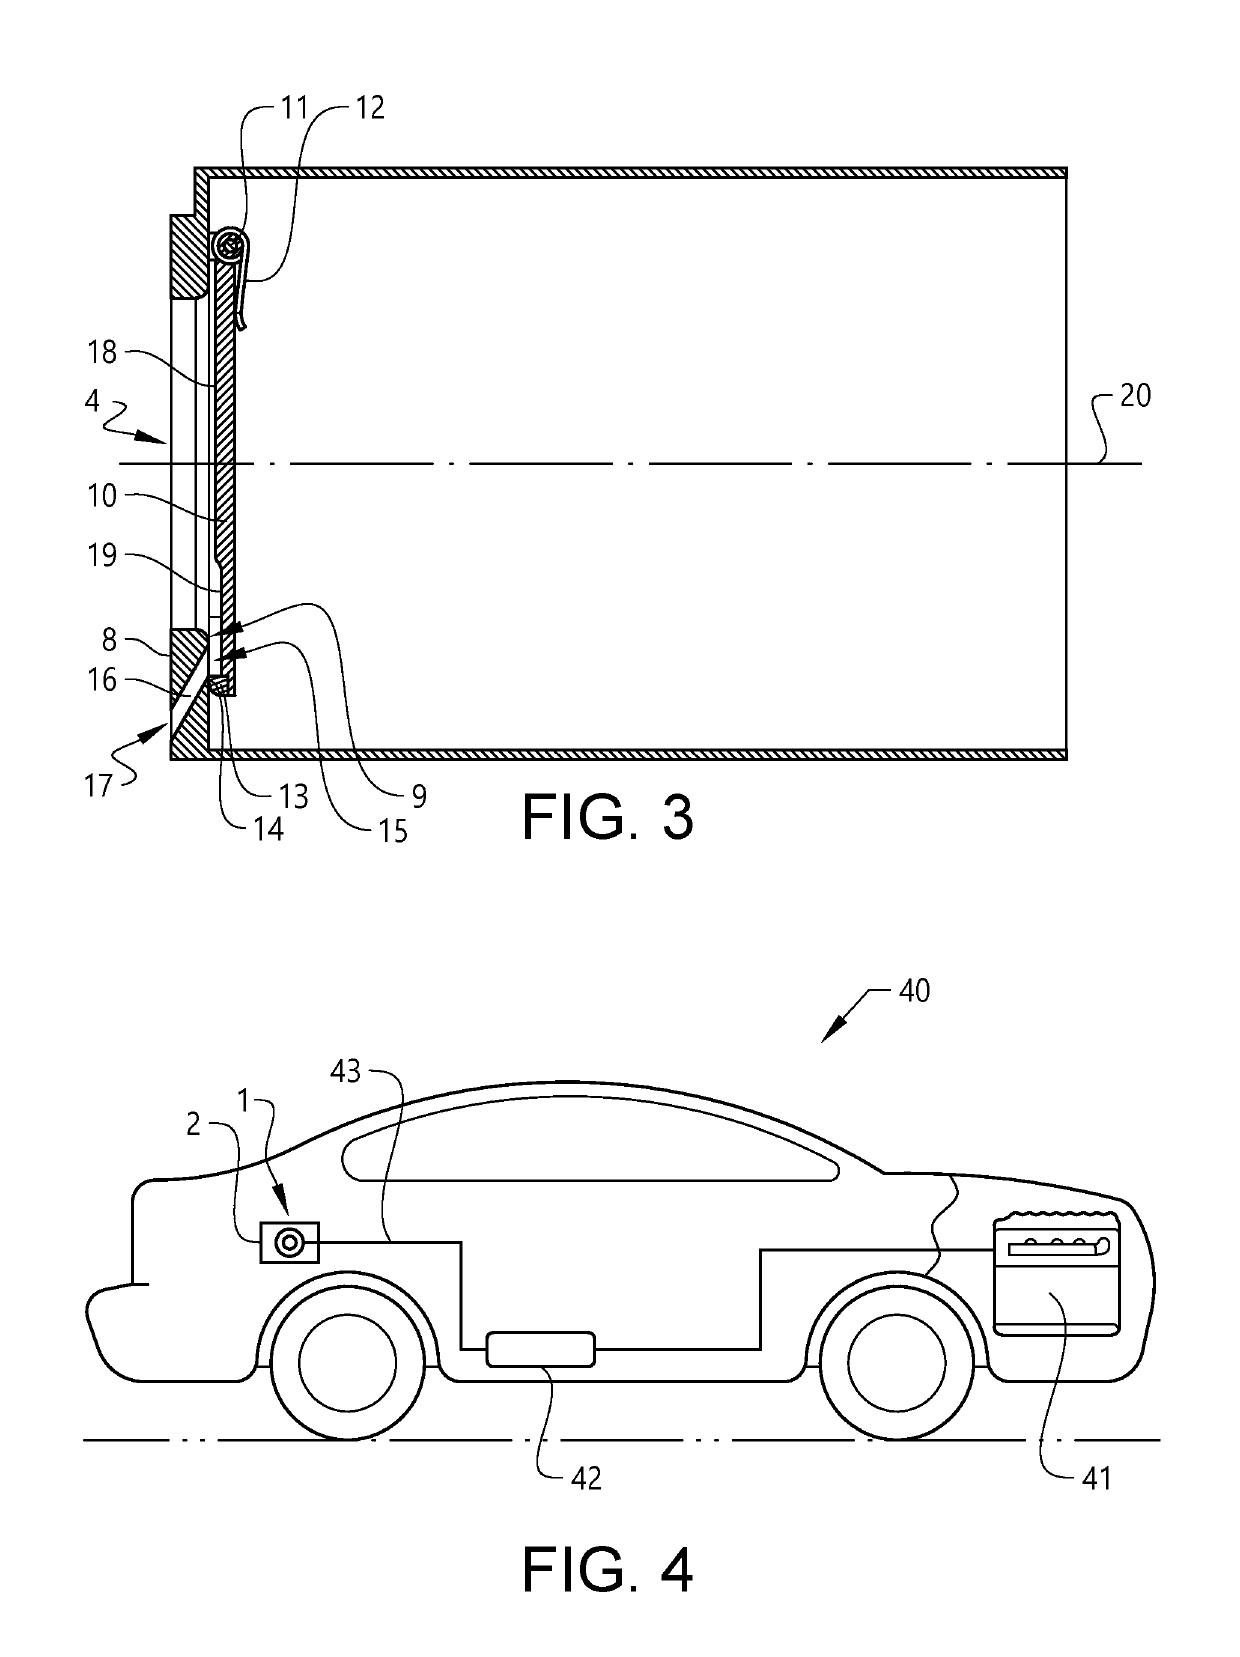 Capless closure device for a fuel tank filler neck of a vehicle and a vehicle including such a device